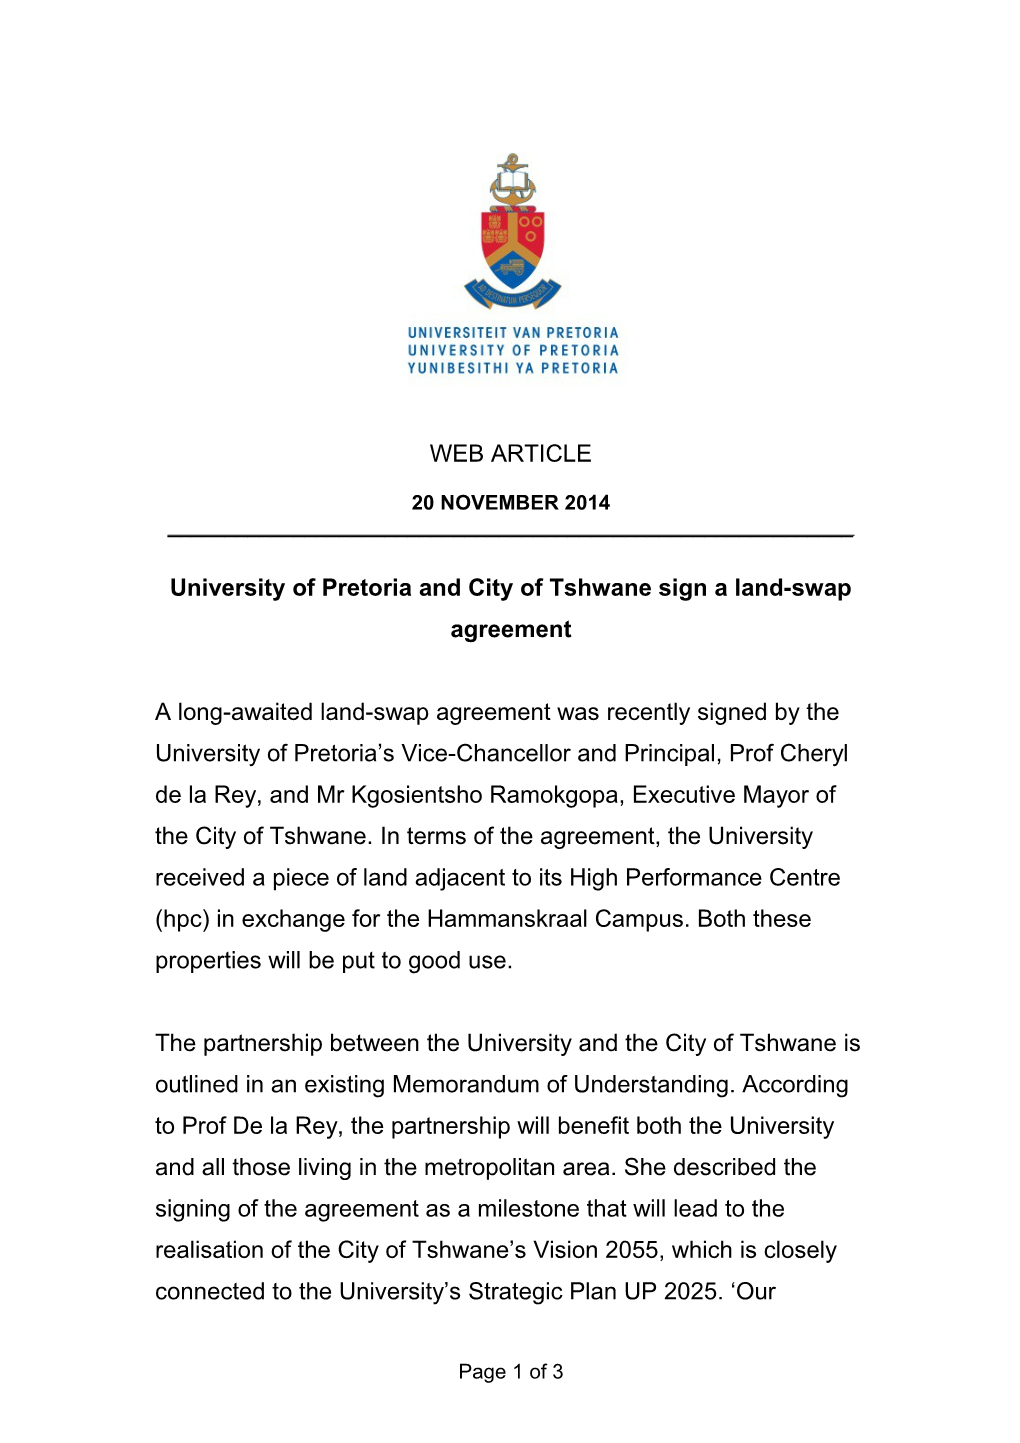 University of Pretoria and City of Tshwane Sign a Land-Swap Agreement